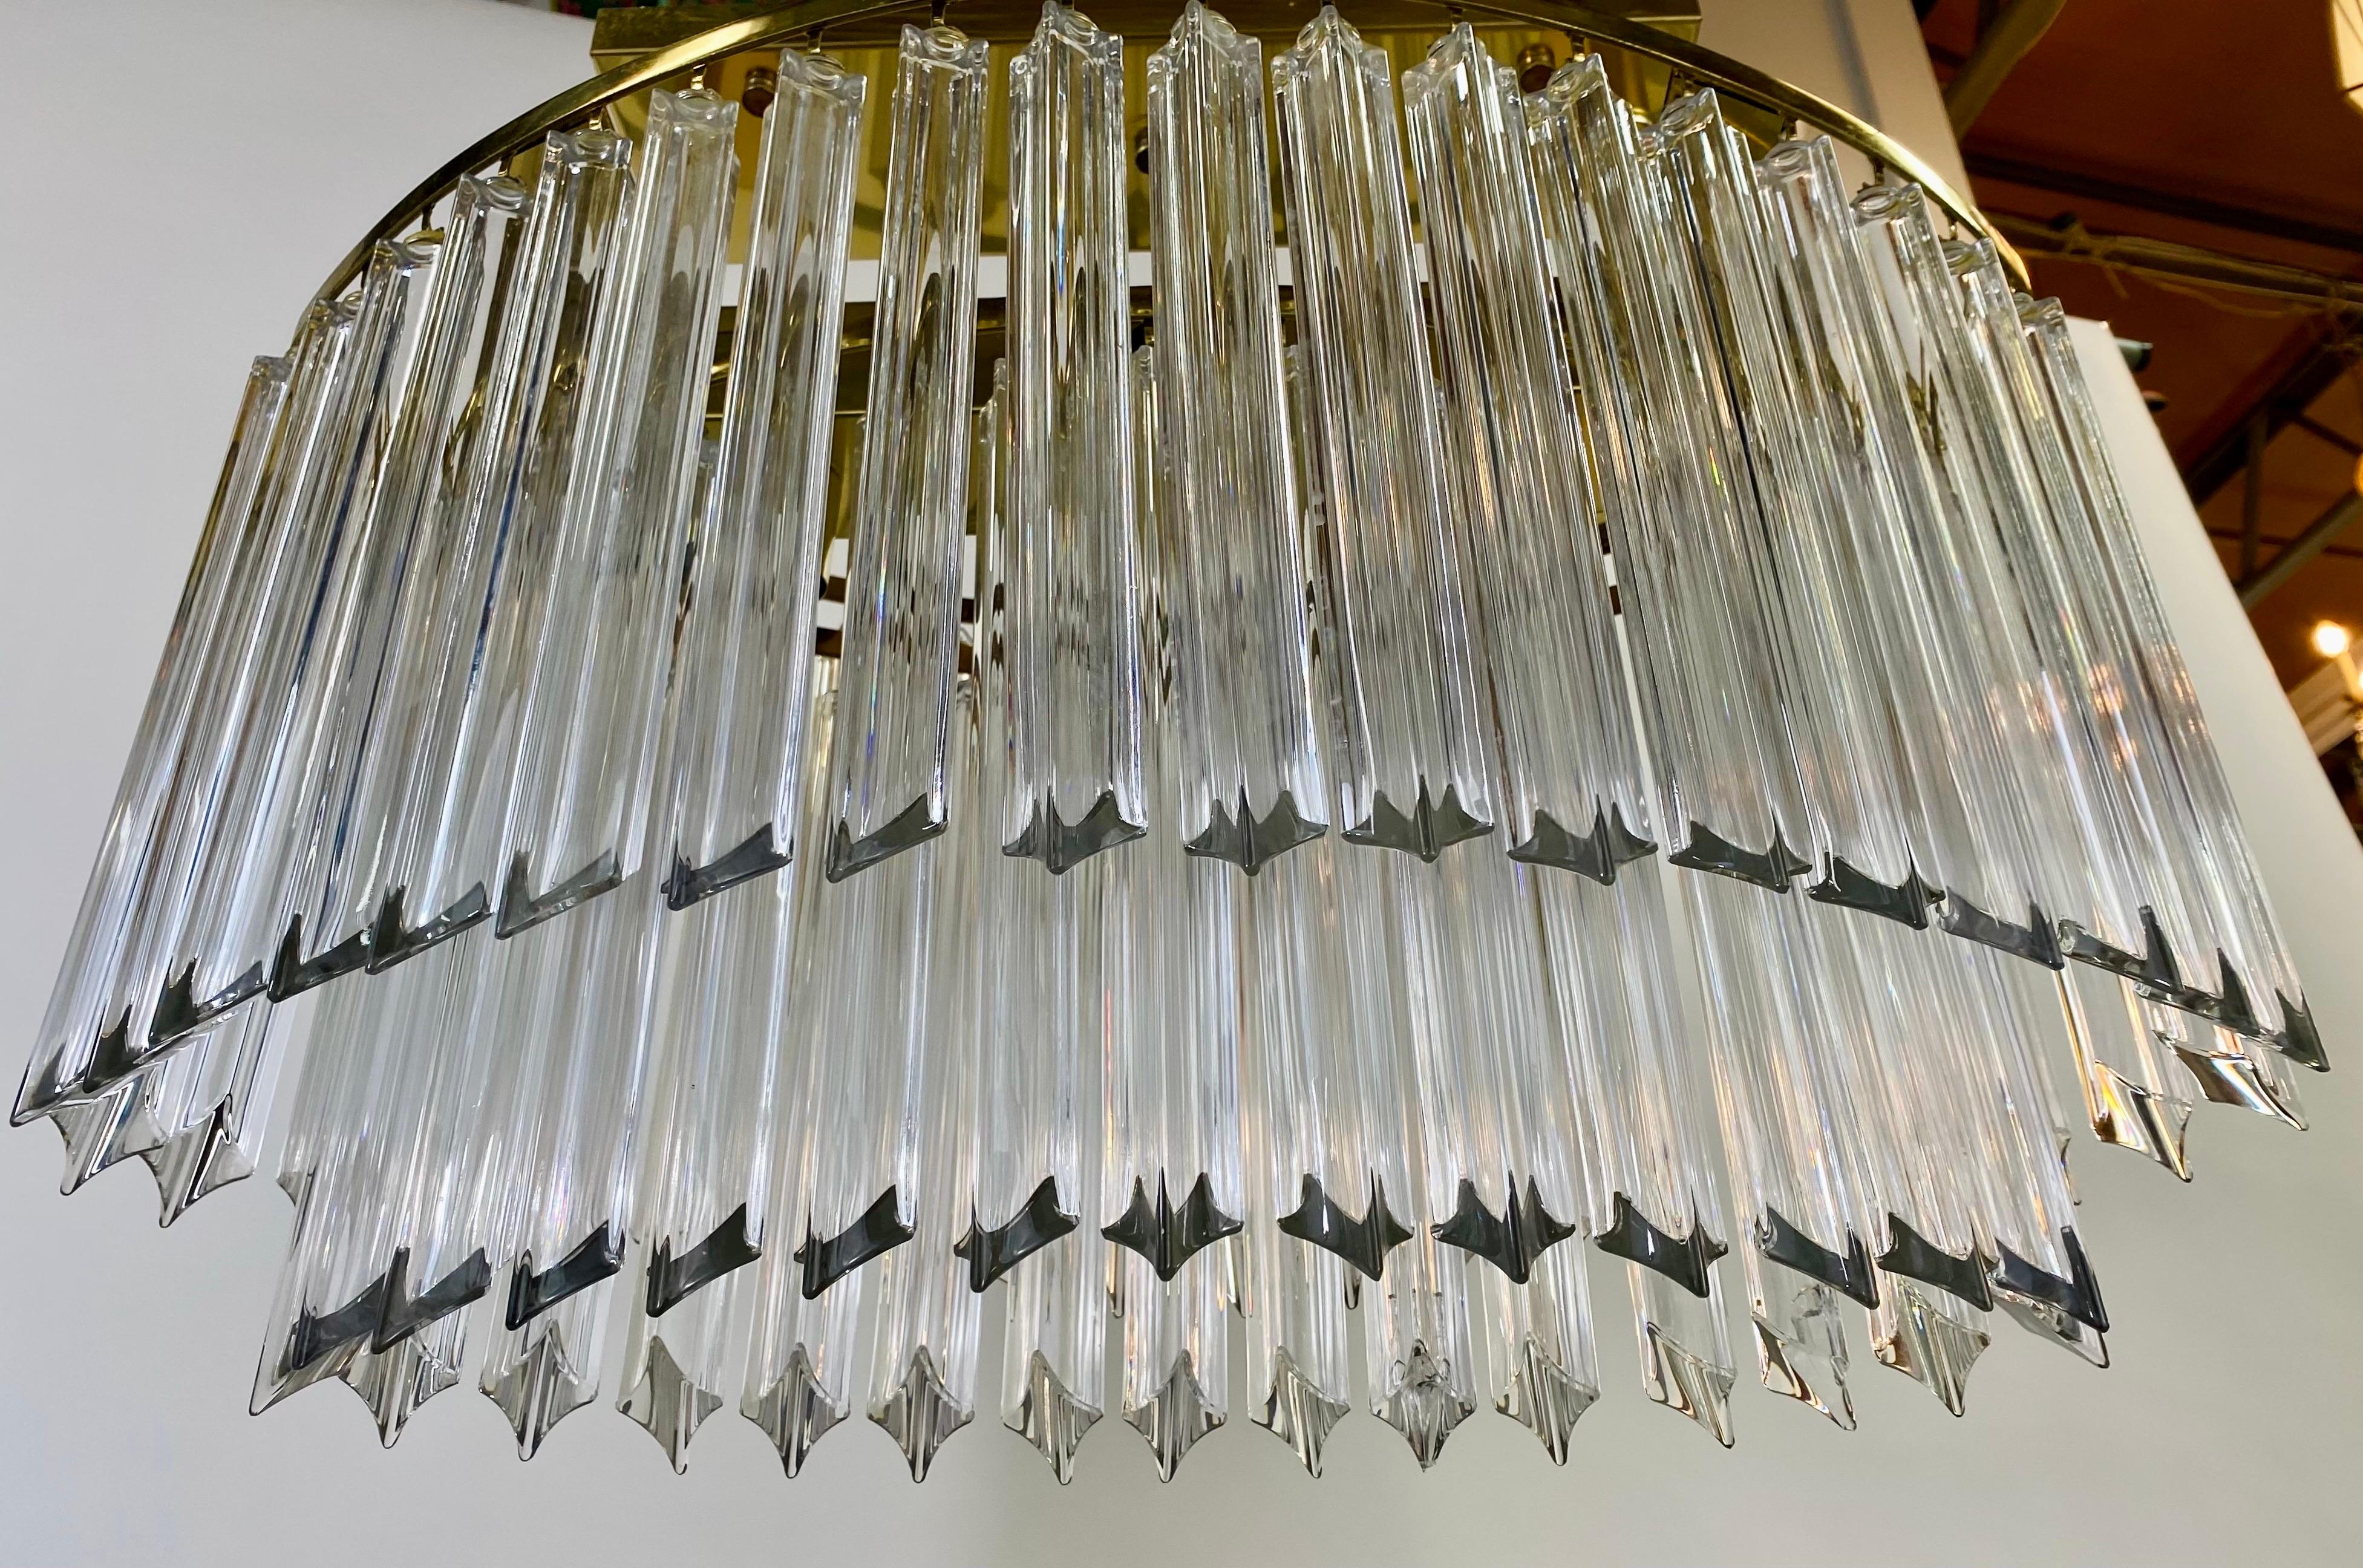 An exceptional Mid- Century Modern oval chandelier by Venini ( Founded 1921 in Milan, Italy by Paolo Venini and Giacomo Cappellin). The stylish two-tiered chandelier features hand-blown Murano glass triede elongated prisms that dance in the light